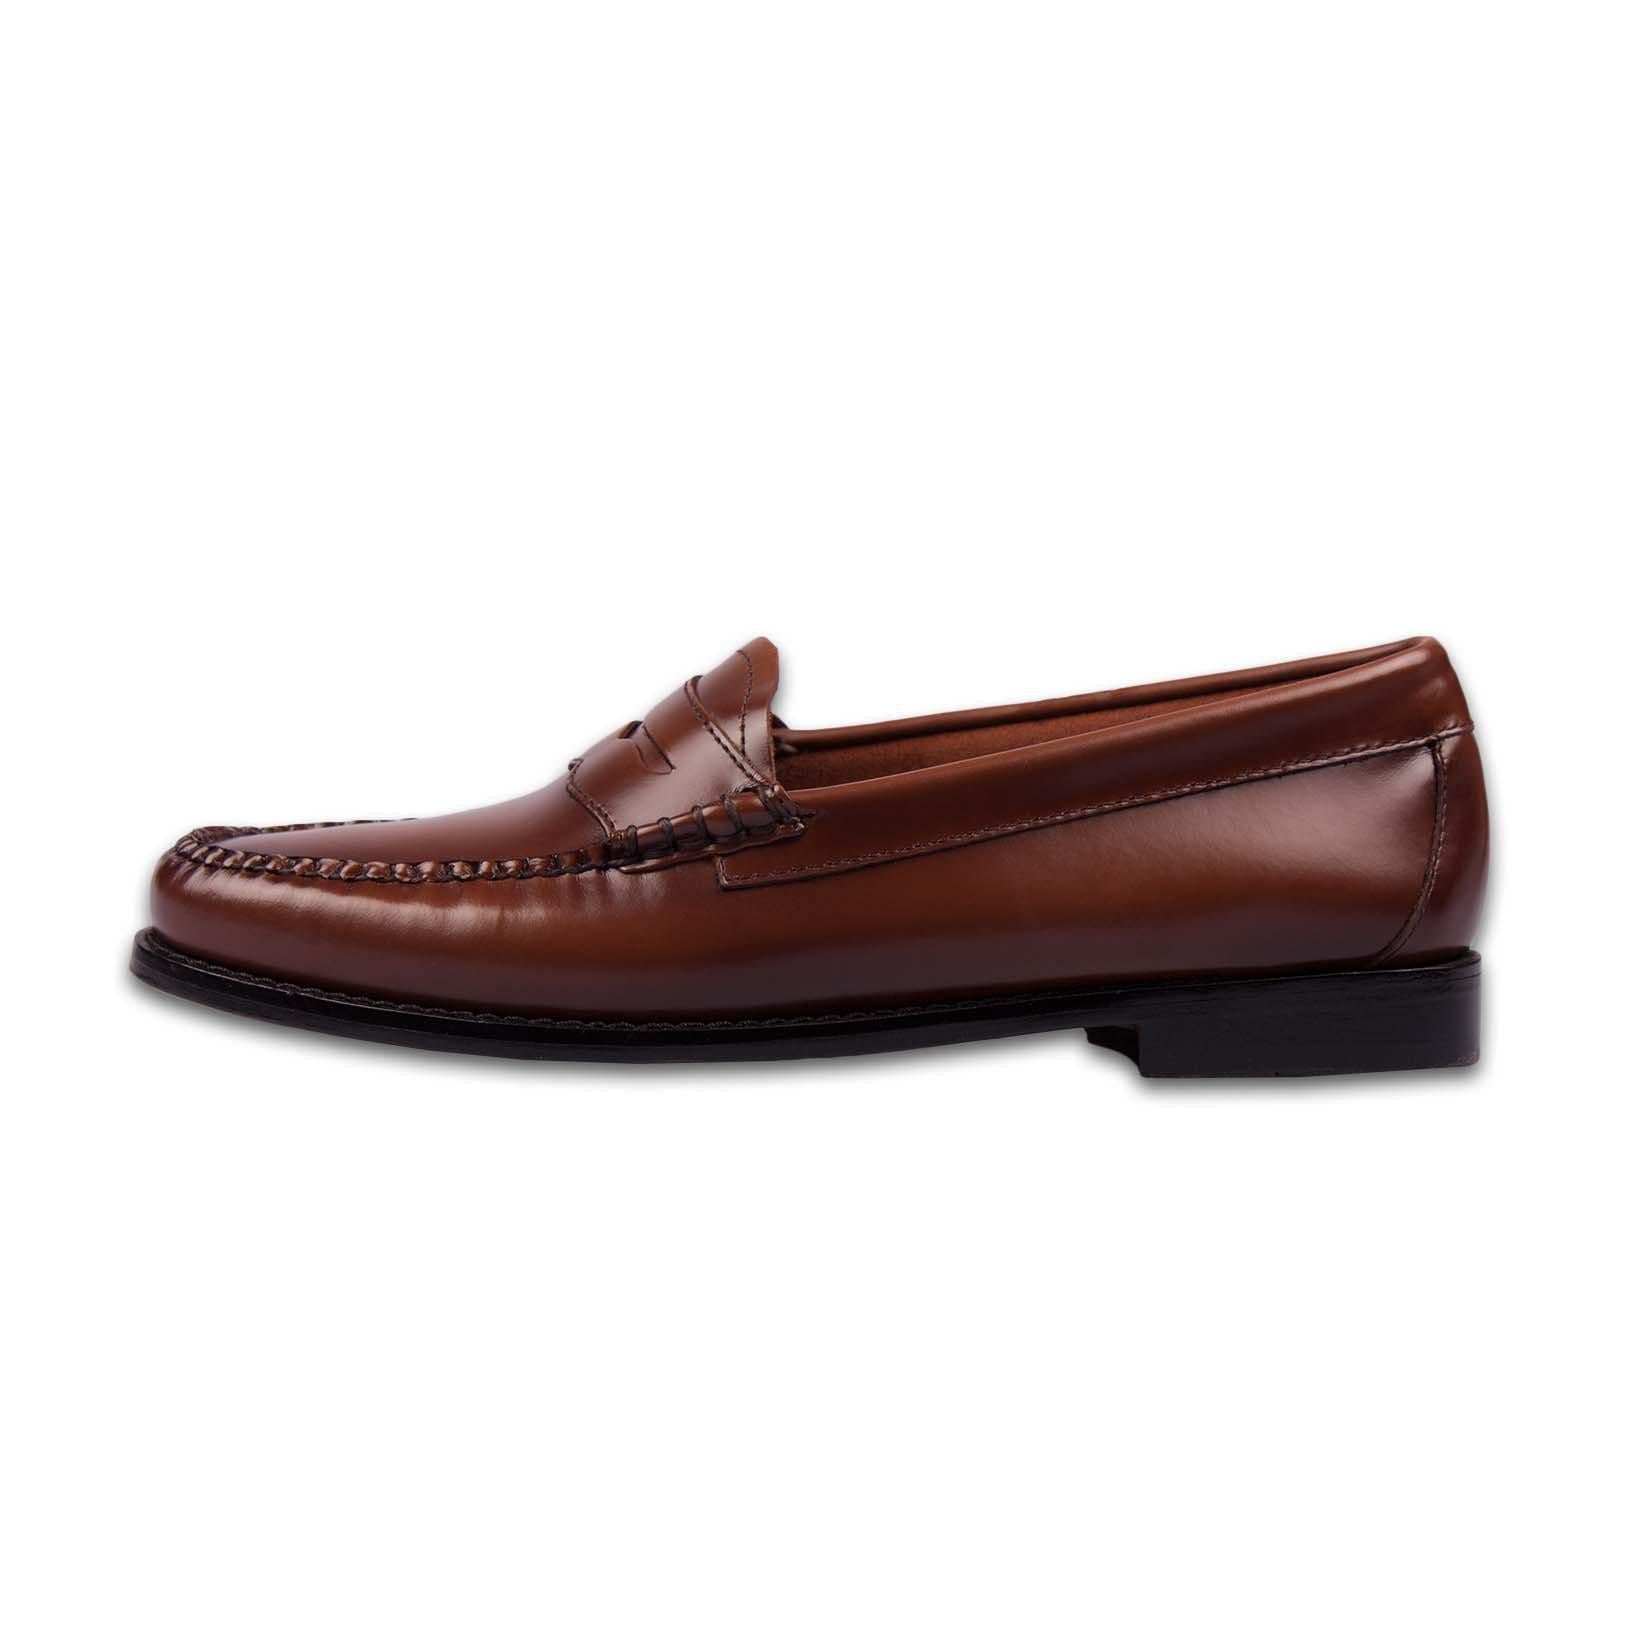 Weejuns Larson Penny Loafer-Bass-Conrad Hasselbach Shoes & Garment